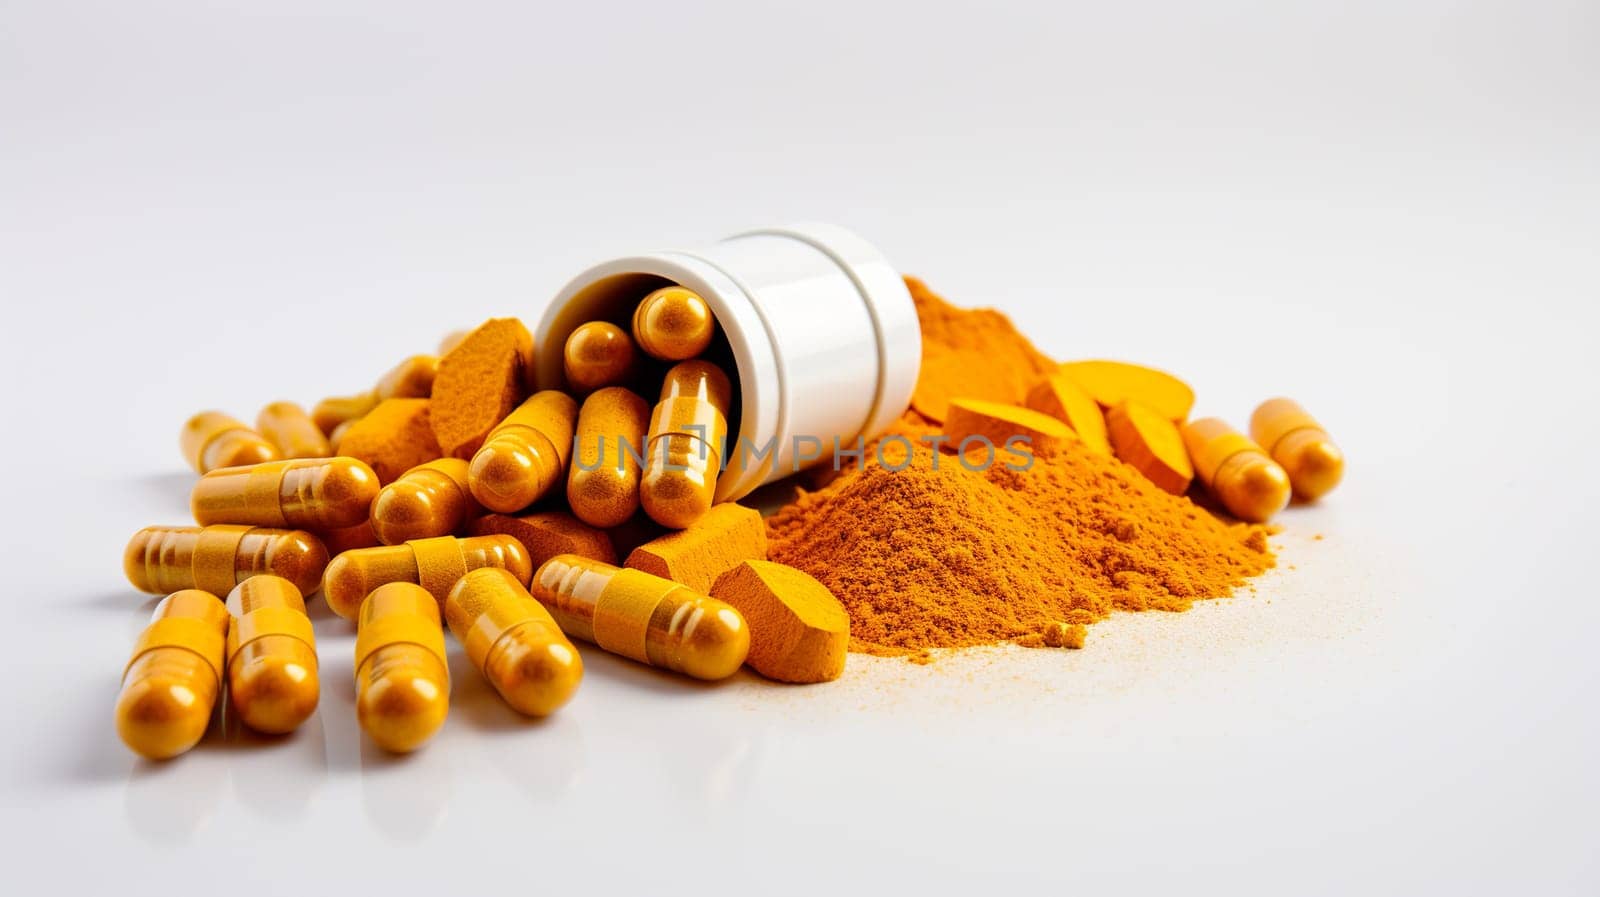  Natural Healing Herbal Medicine Turmeric, Nutritional   Turmeric, Pills, in the photo from a top angle Generate AI